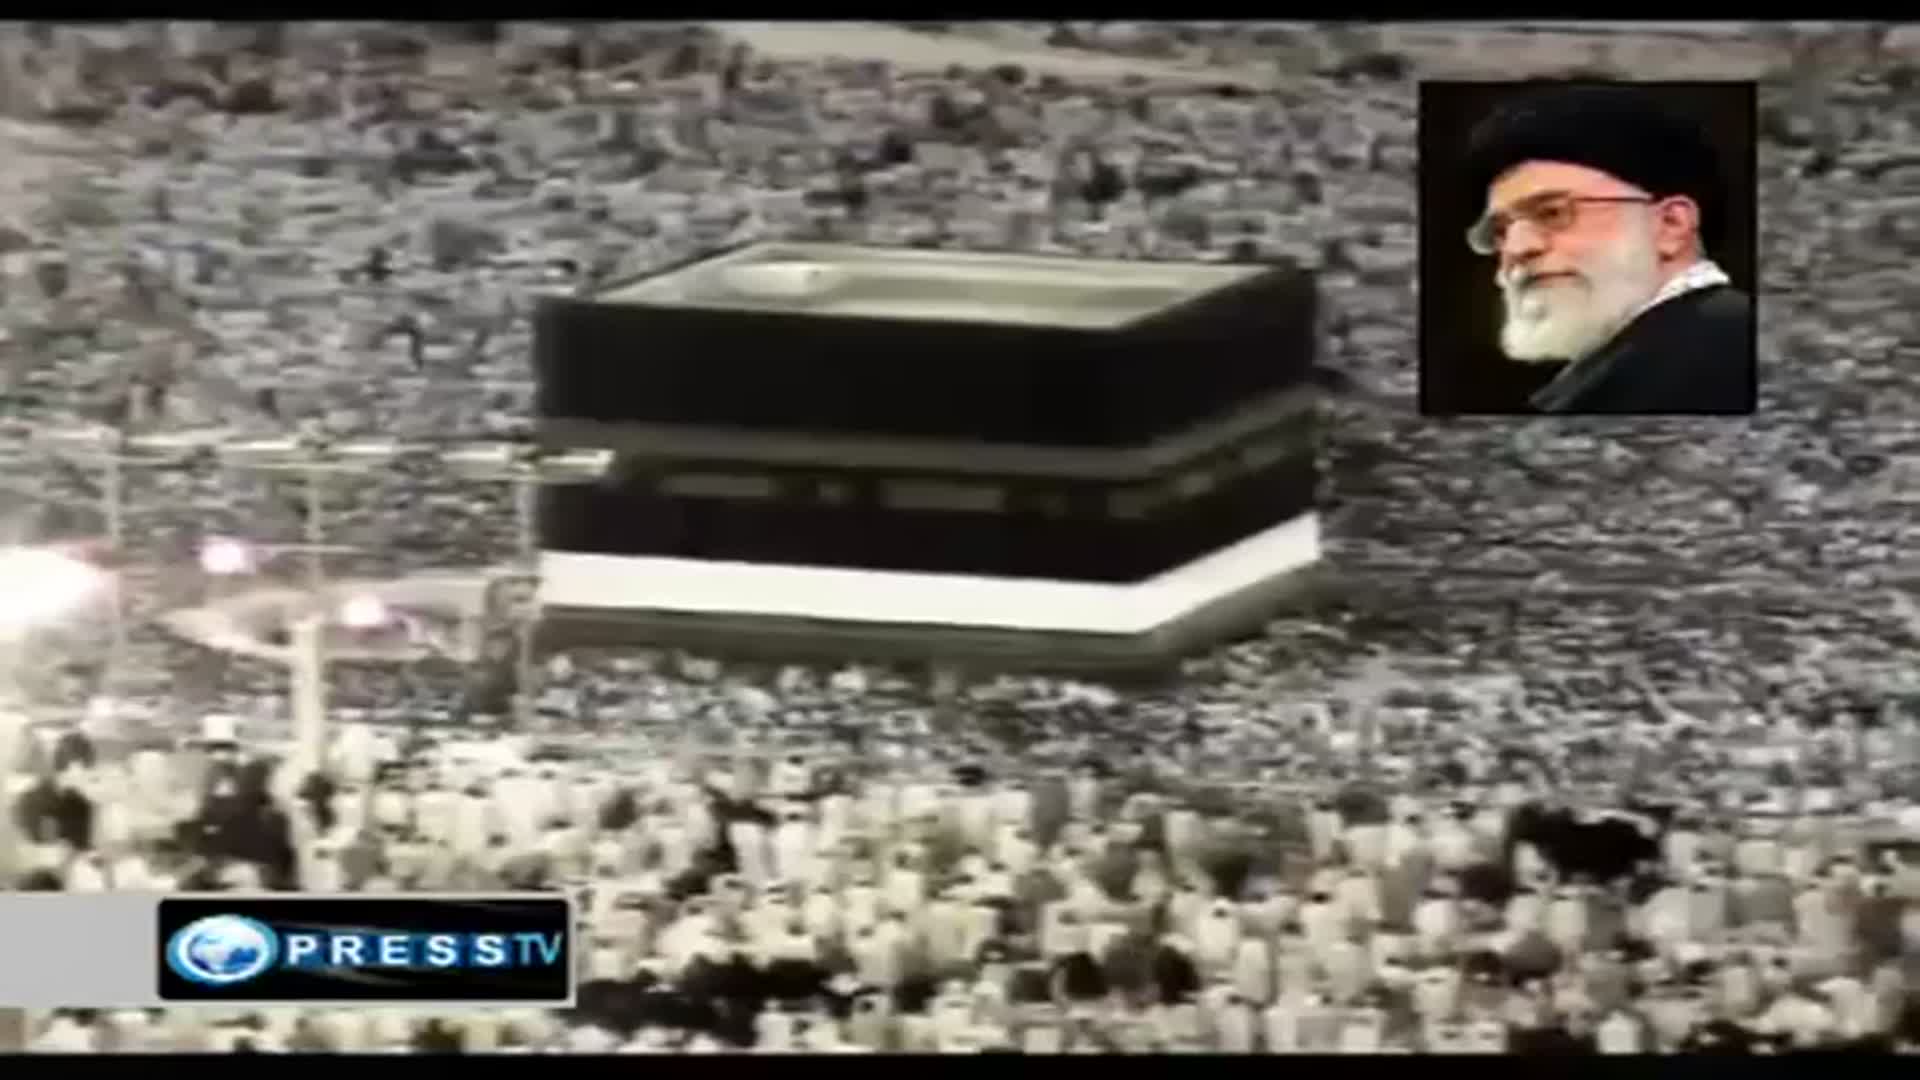 Hajj is a symbol of monotheism and spirituality - Leader Hajj Message 2010 1431 - [English]